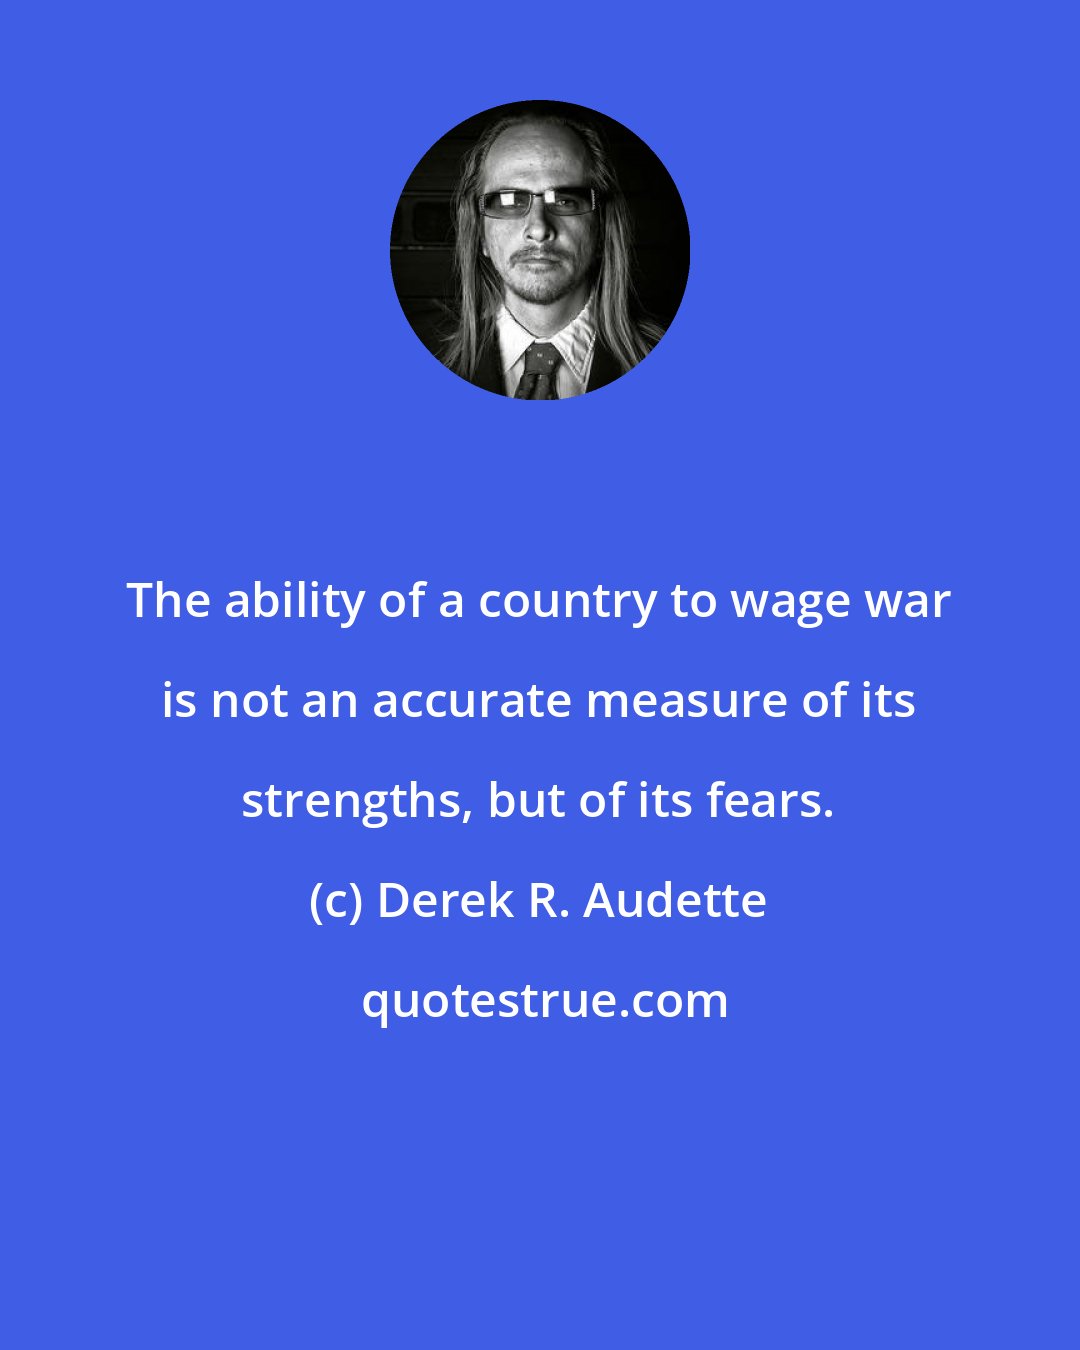 Derek R. Audette: The ability of a country to wage war is not an accurate measure of its strengths, but of its fears.